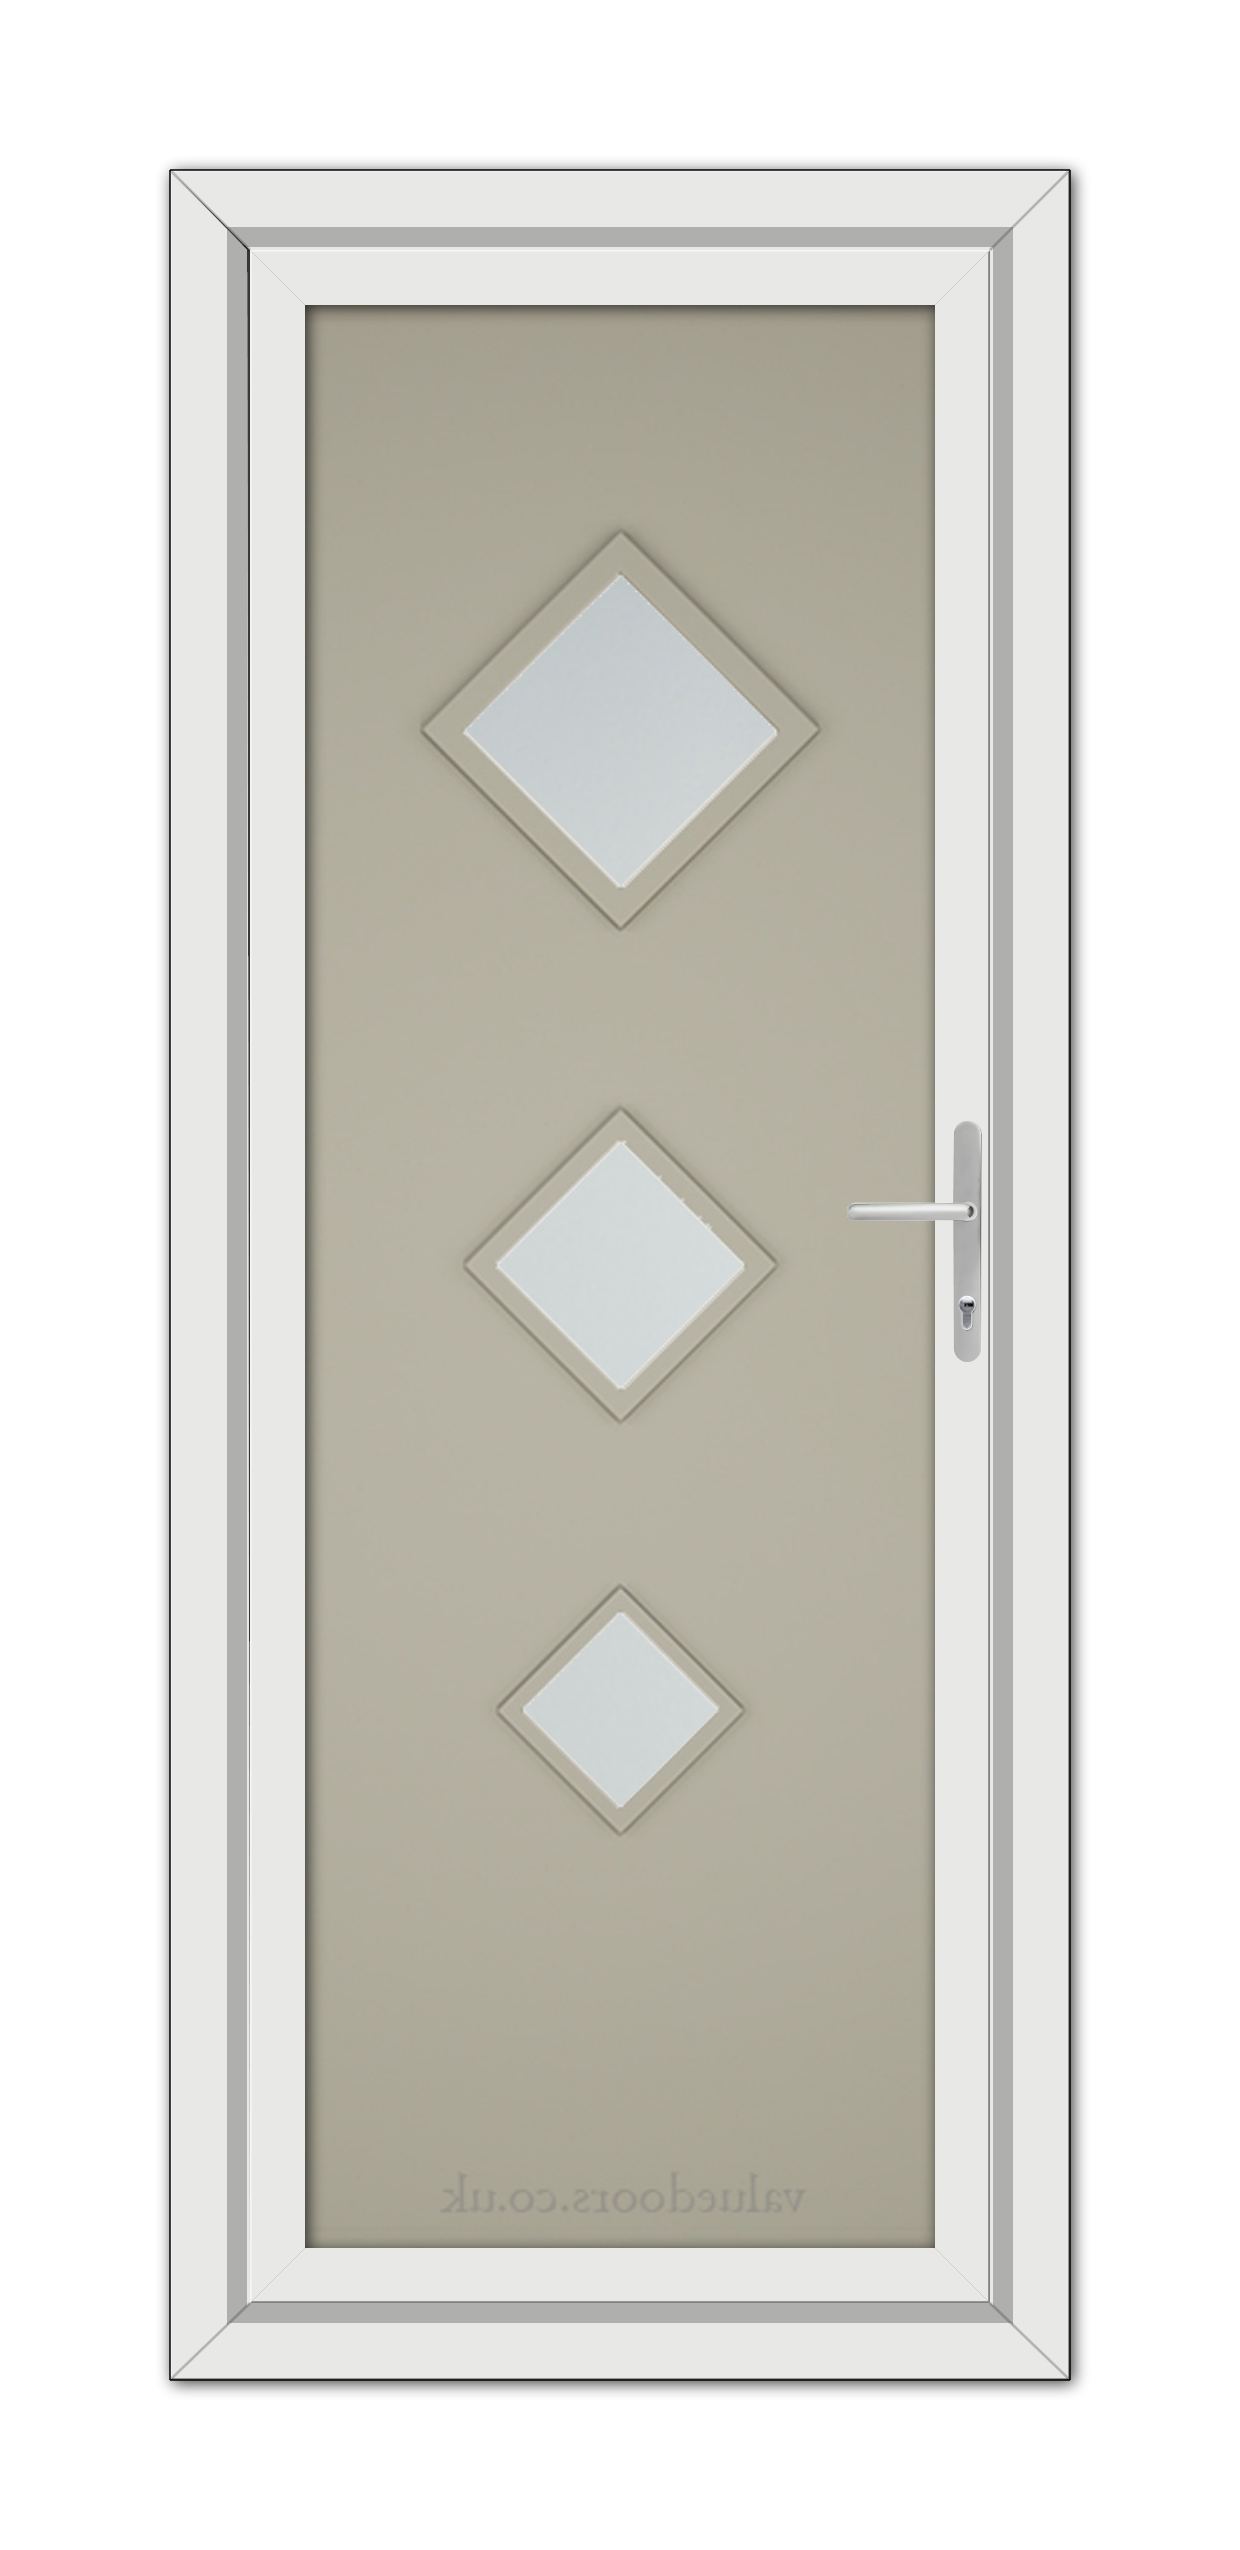 A Pebble Grey Modern 5123 uPVC door with three diamond-shaped glass panels and a white door handle, set in a white frame.